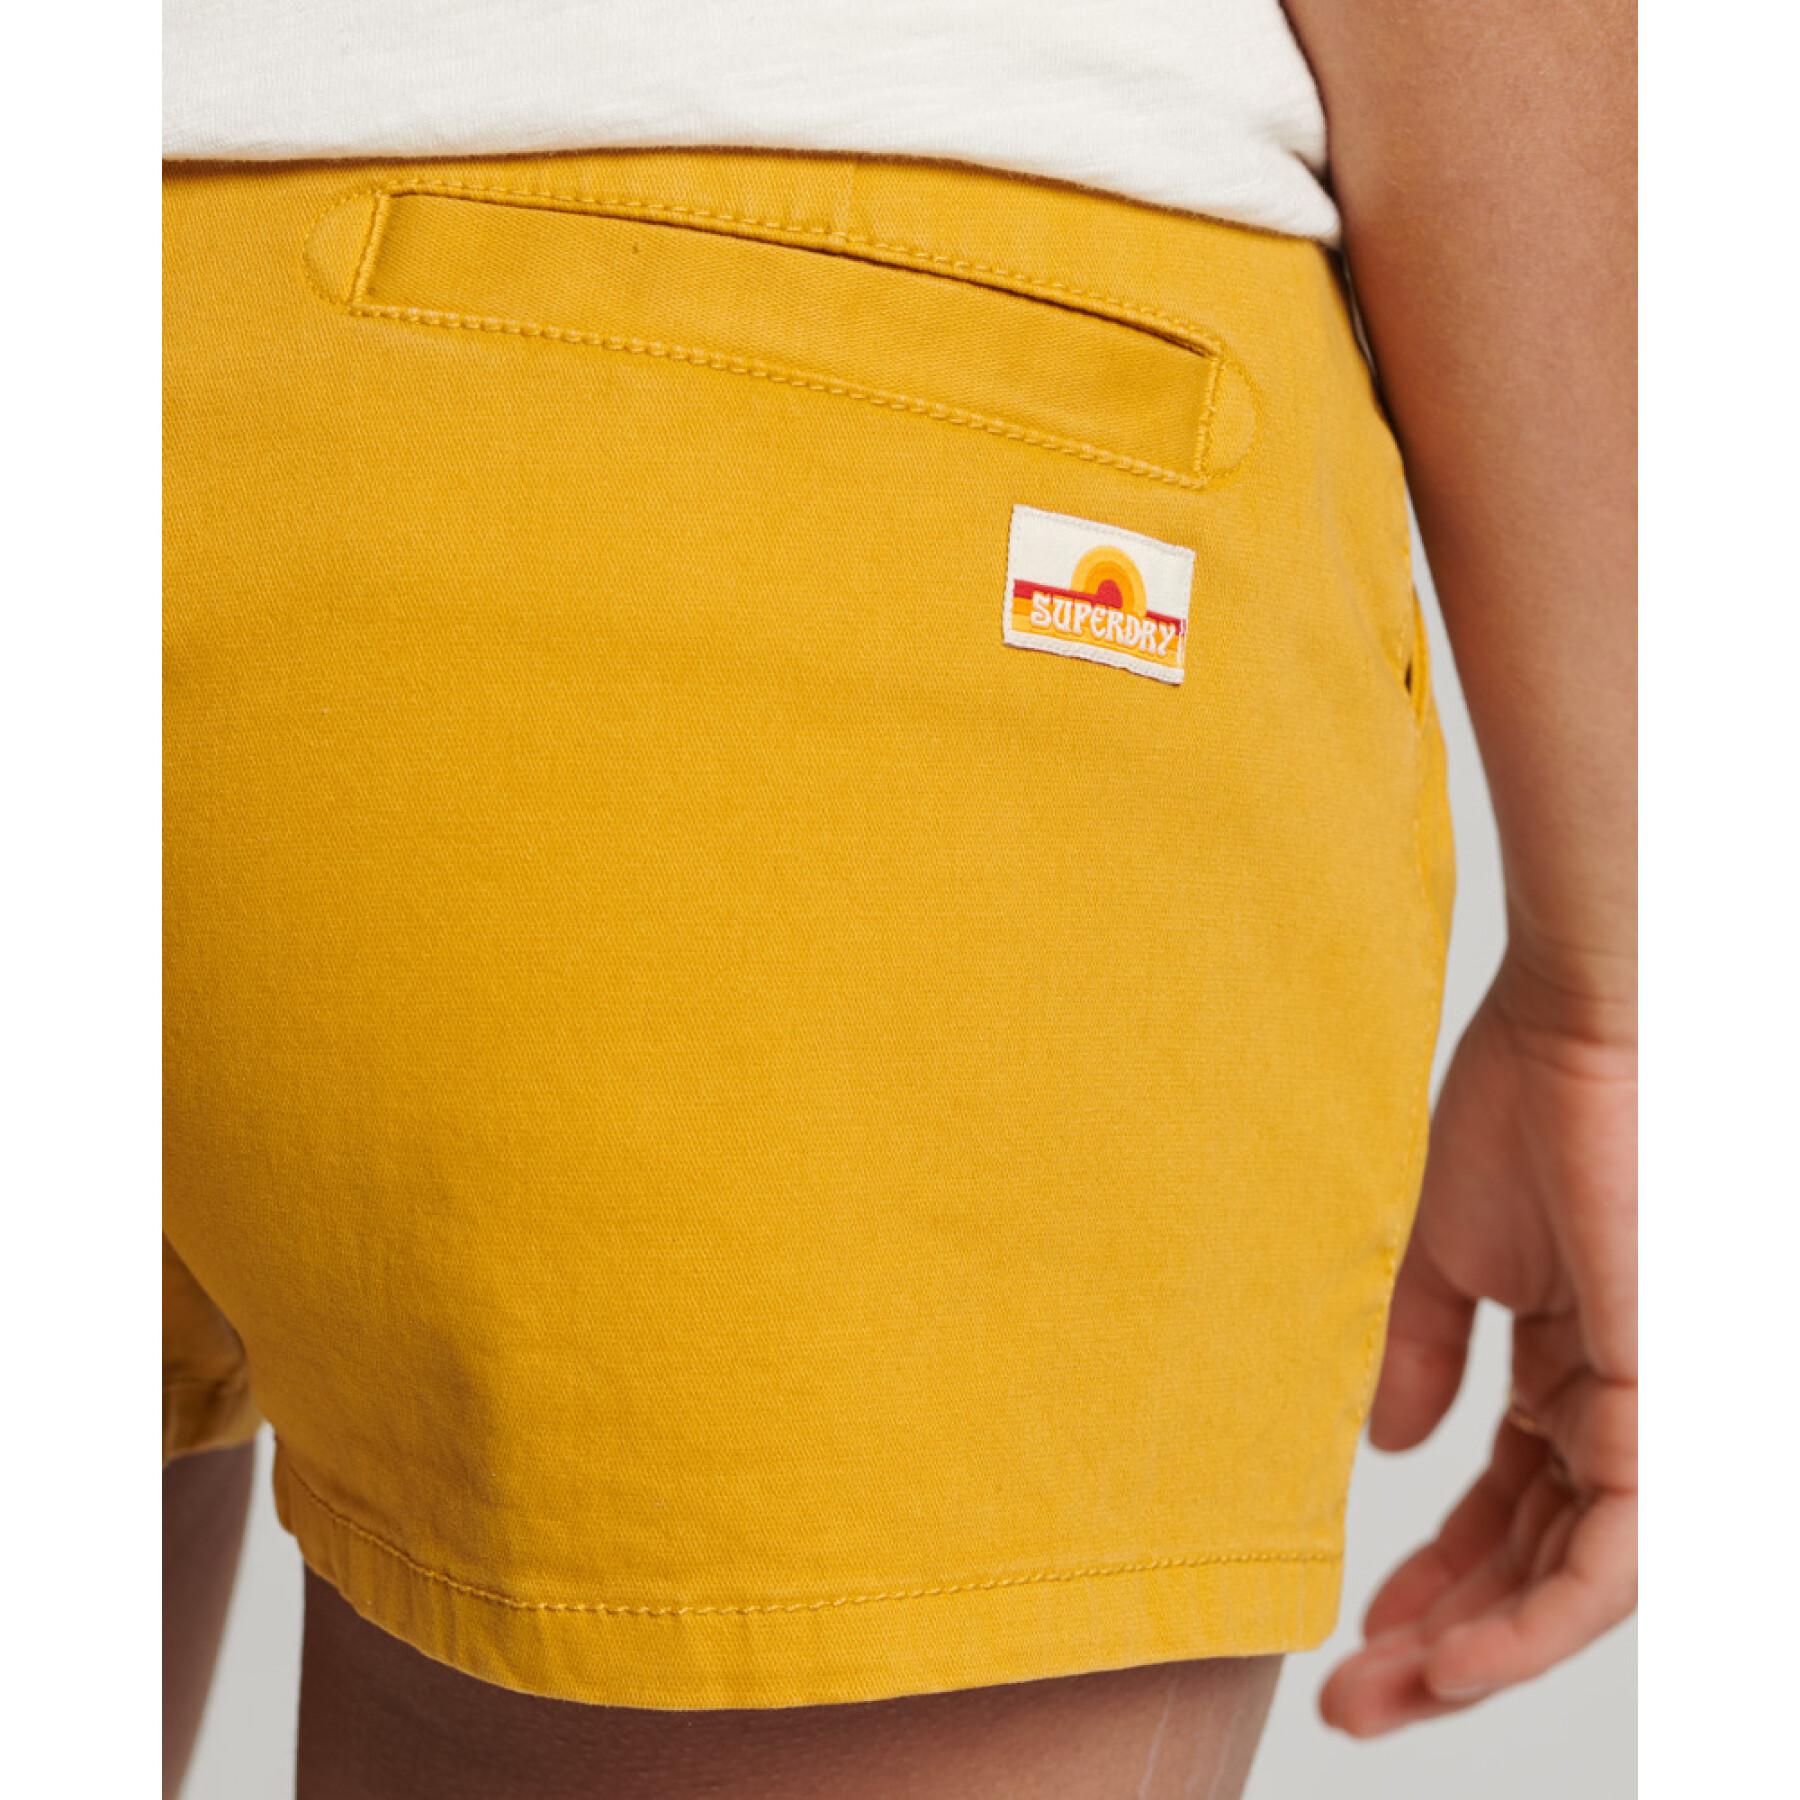 Organic cotton chino shorts for women Superdry Vintage